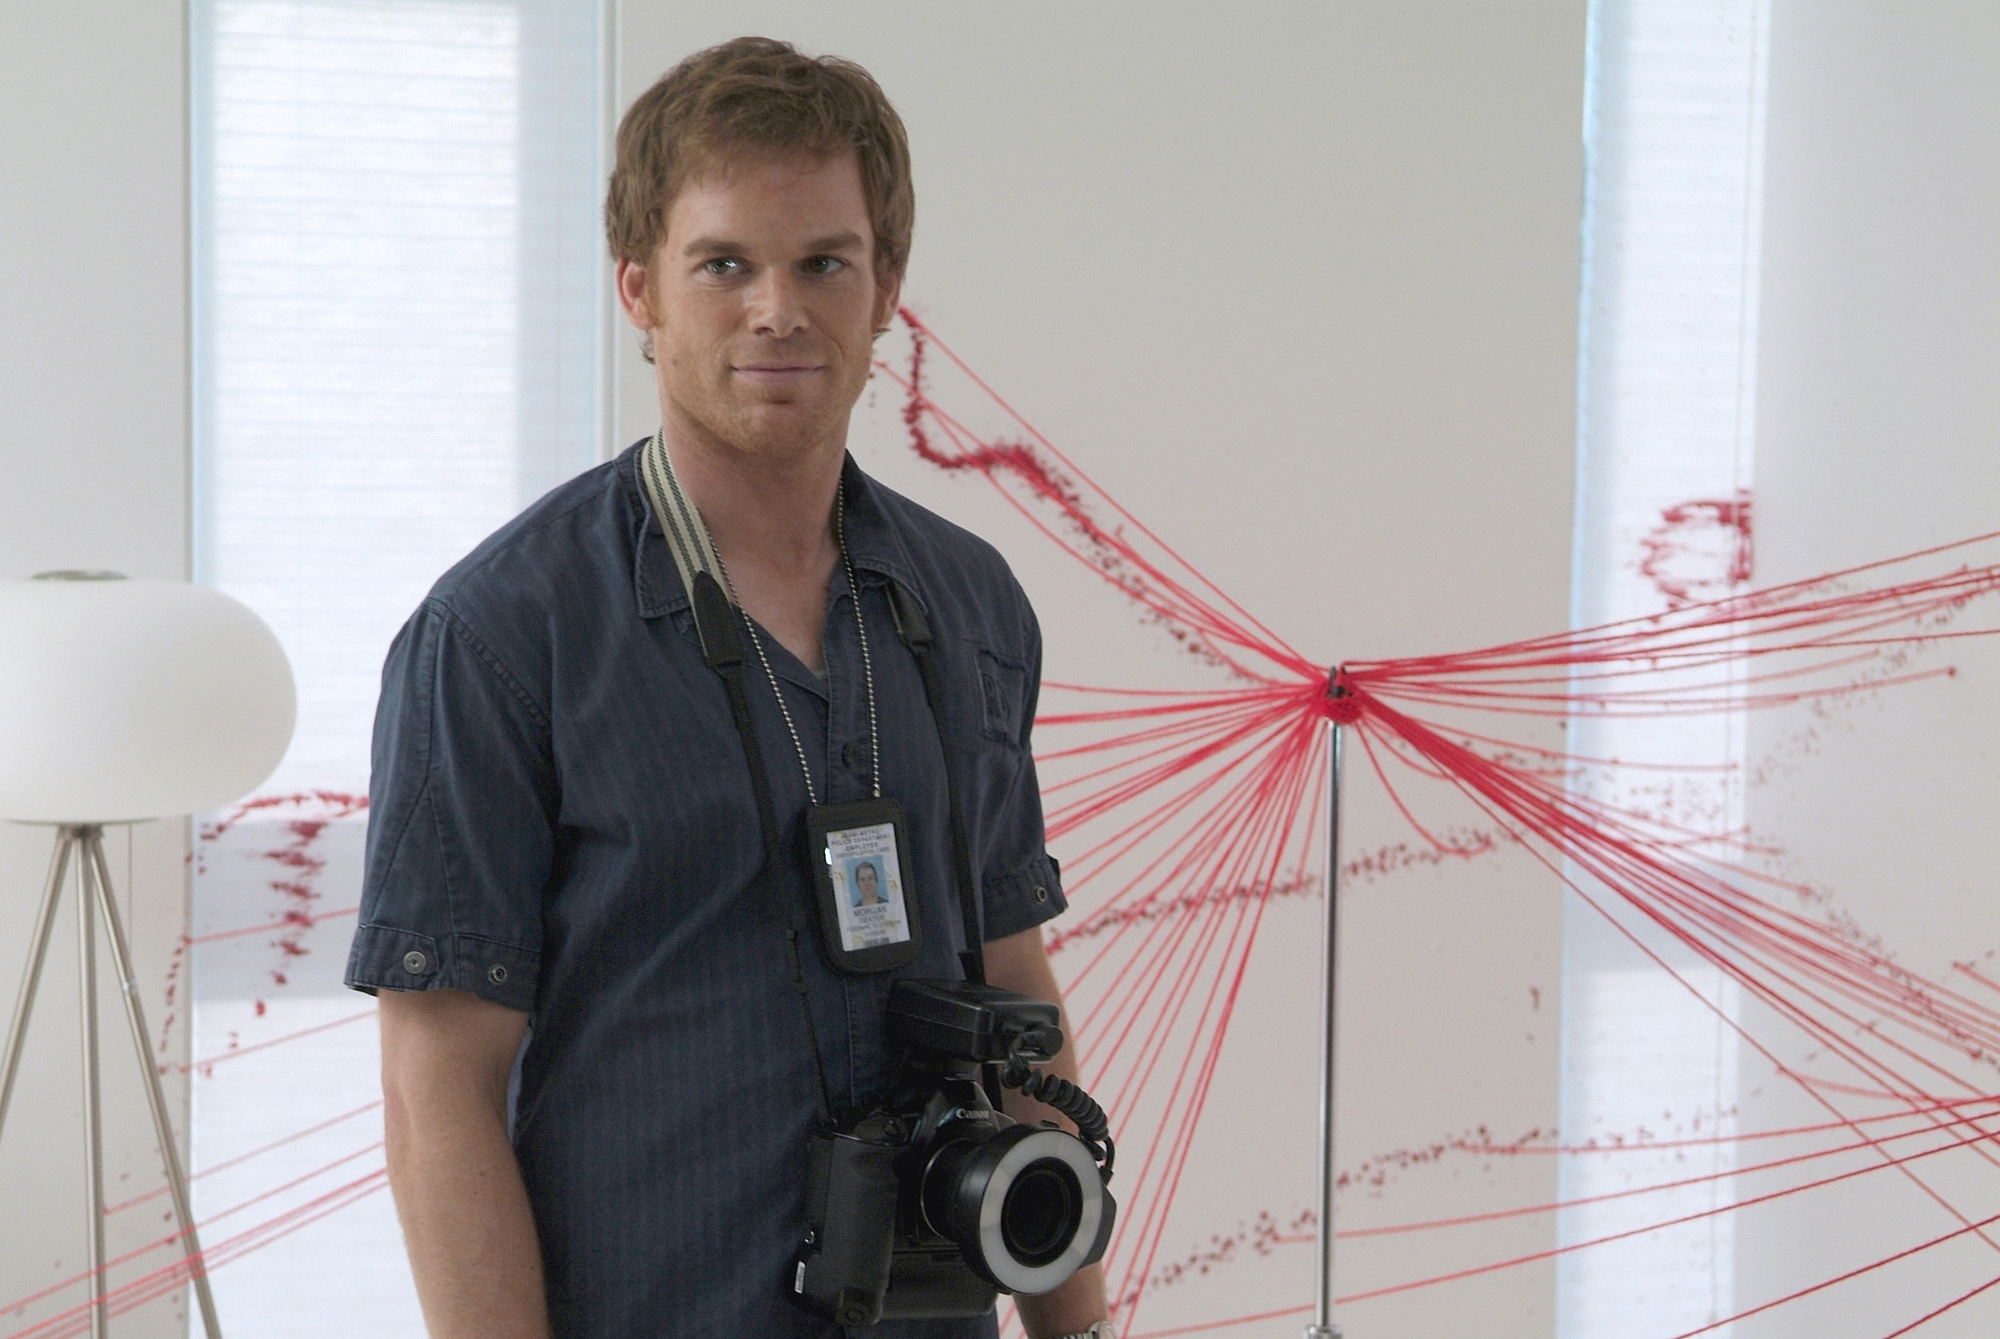 Dexter Morgan stands in front of strings he has attached to various blood splatter patterns. He wears a dark blue collared shirt and a Miami Metro laminate badge. He also has a camera around his neck.